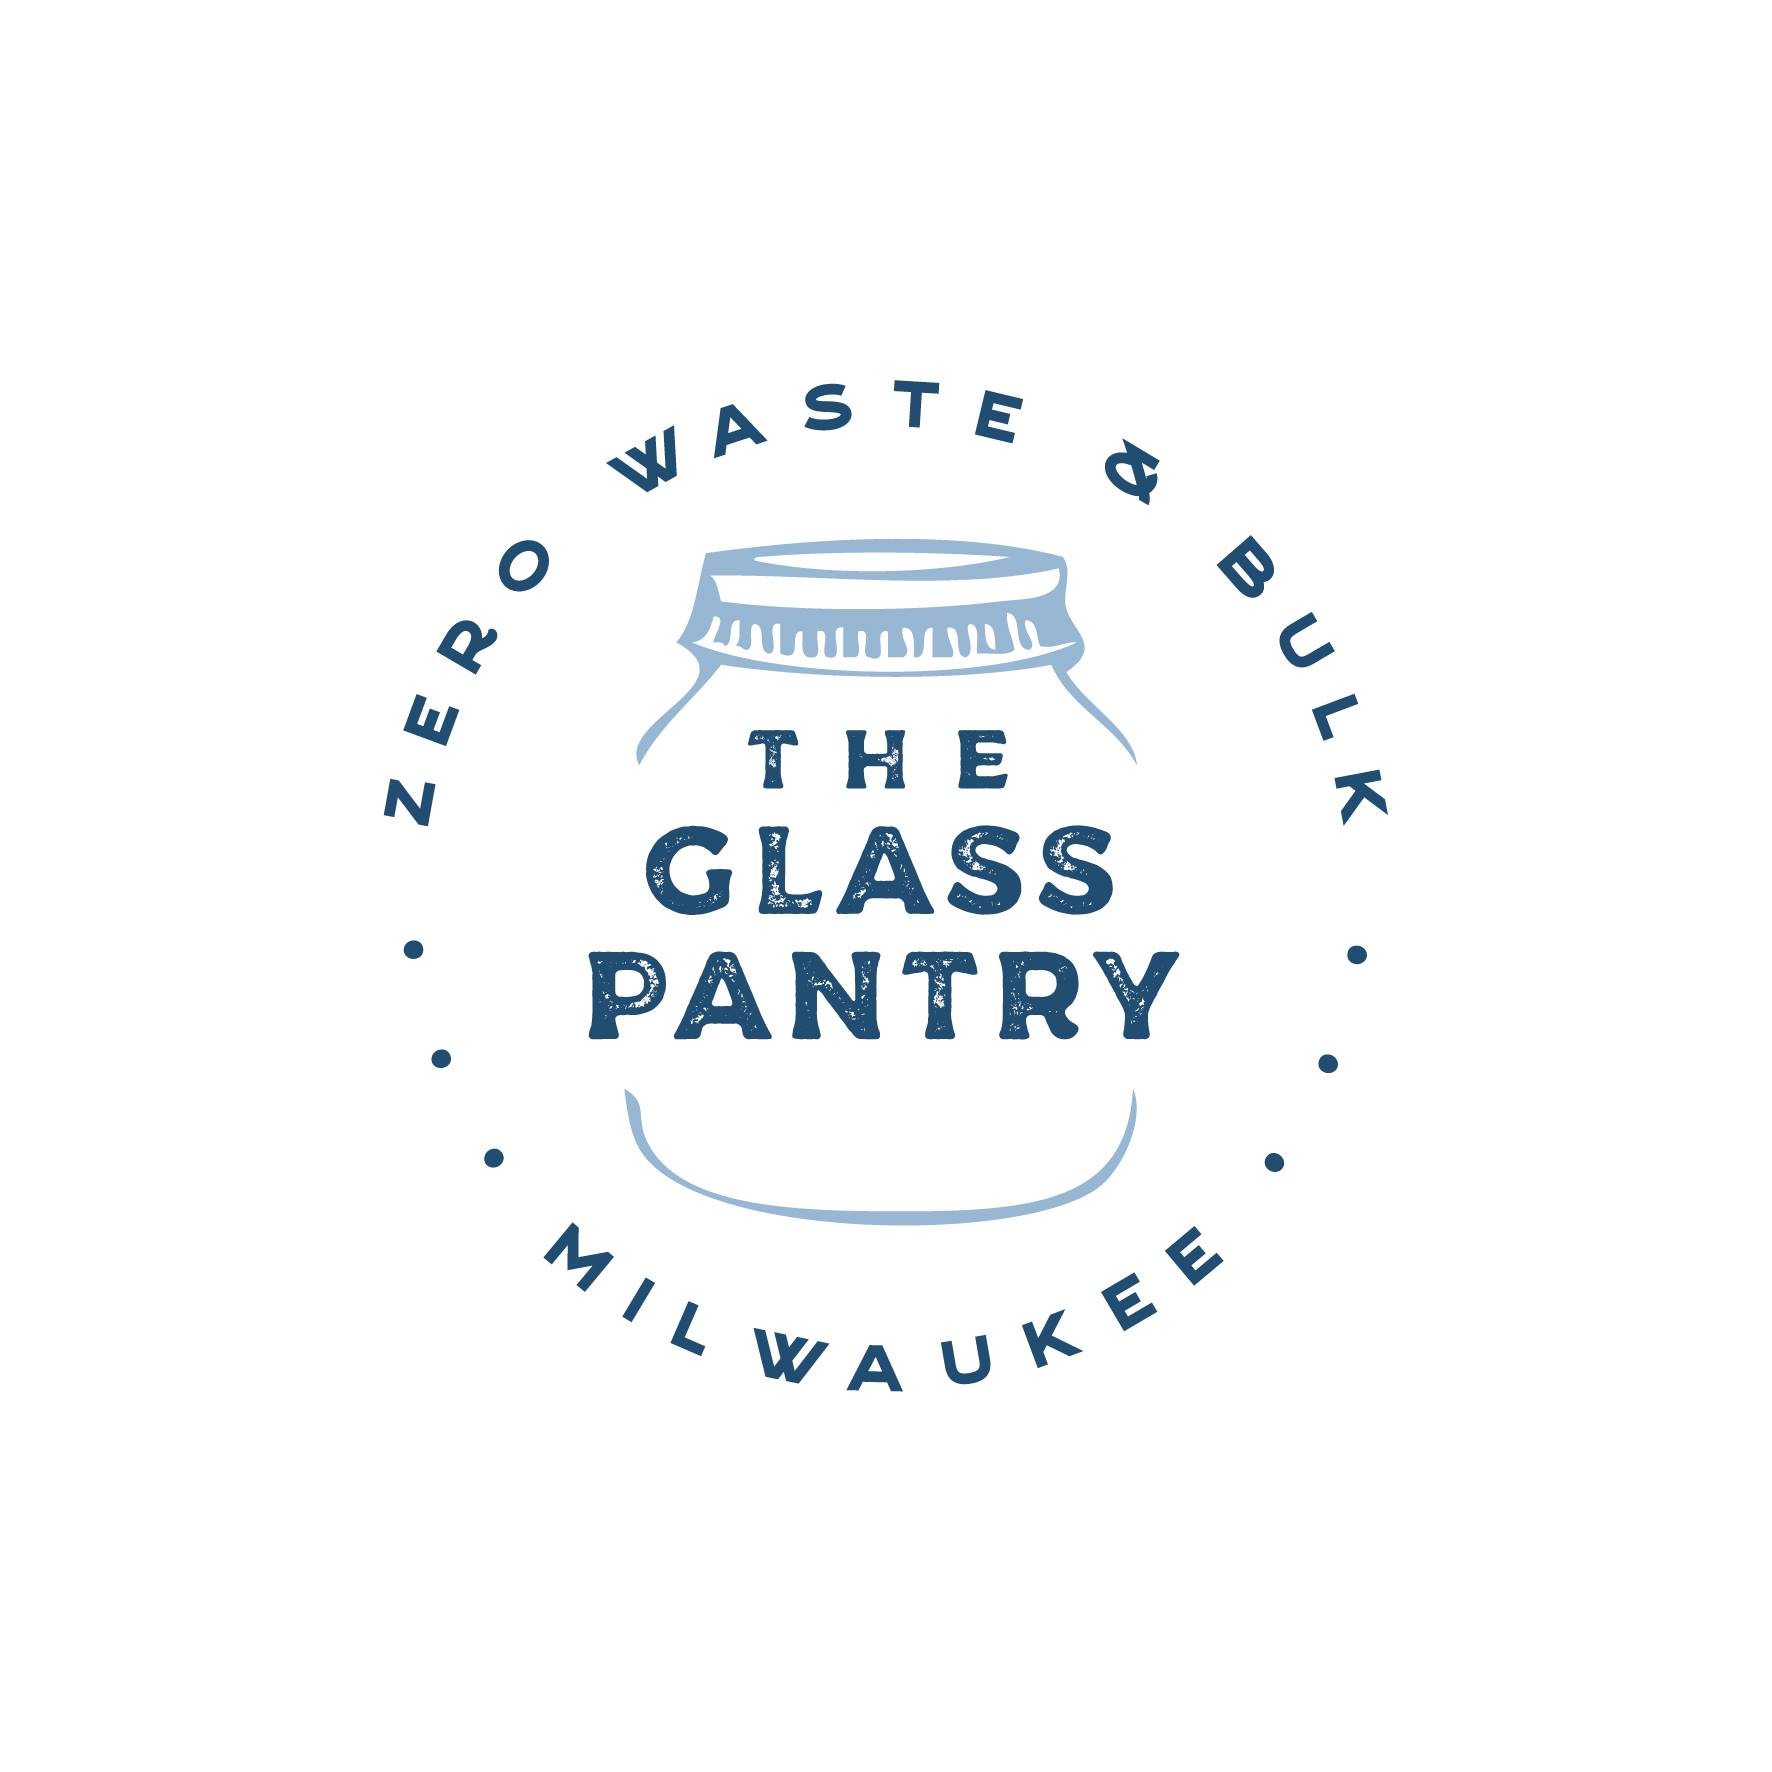 Company logo of The Glass Pantry